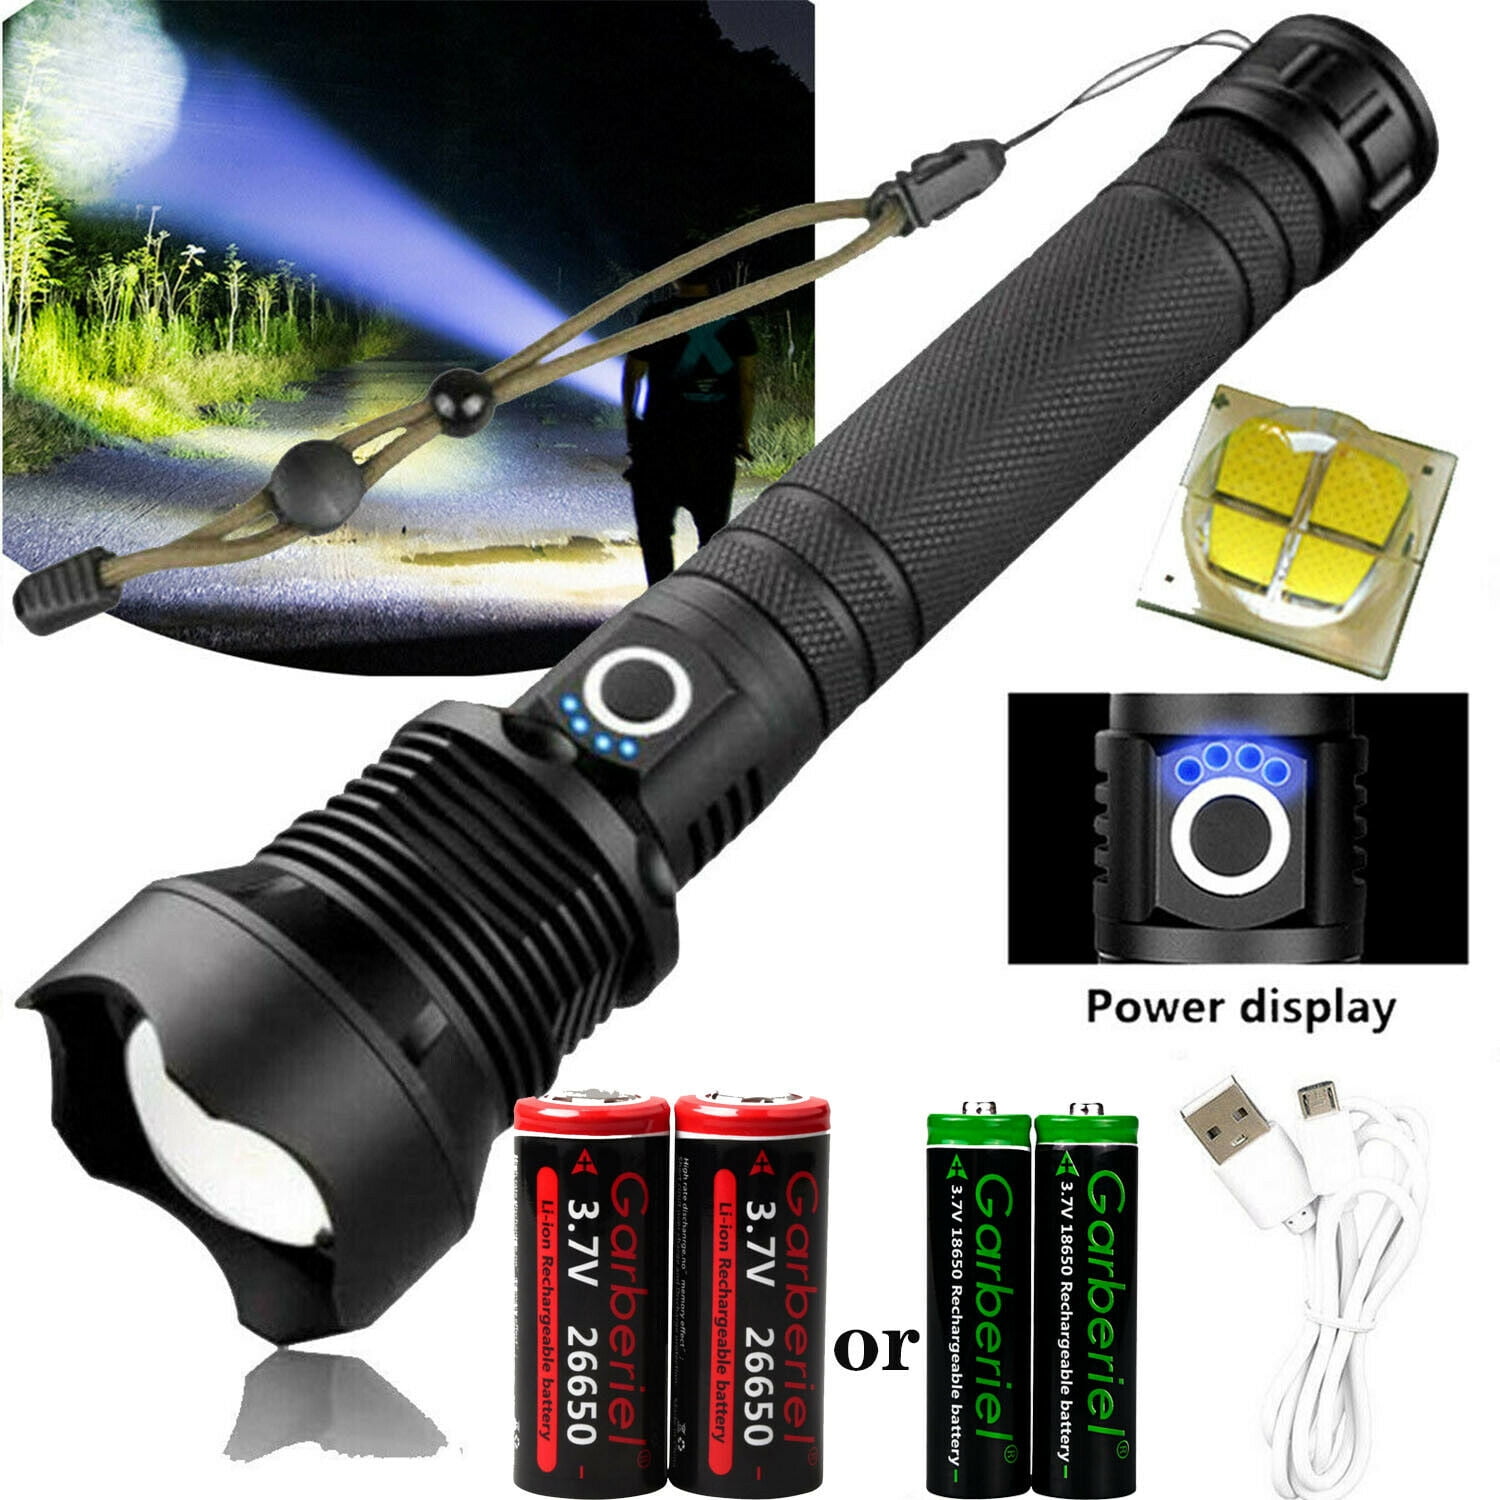 Super Bright Flashlight Zoomable 990000 High Lumens LED Rechargeable 18650 Torch